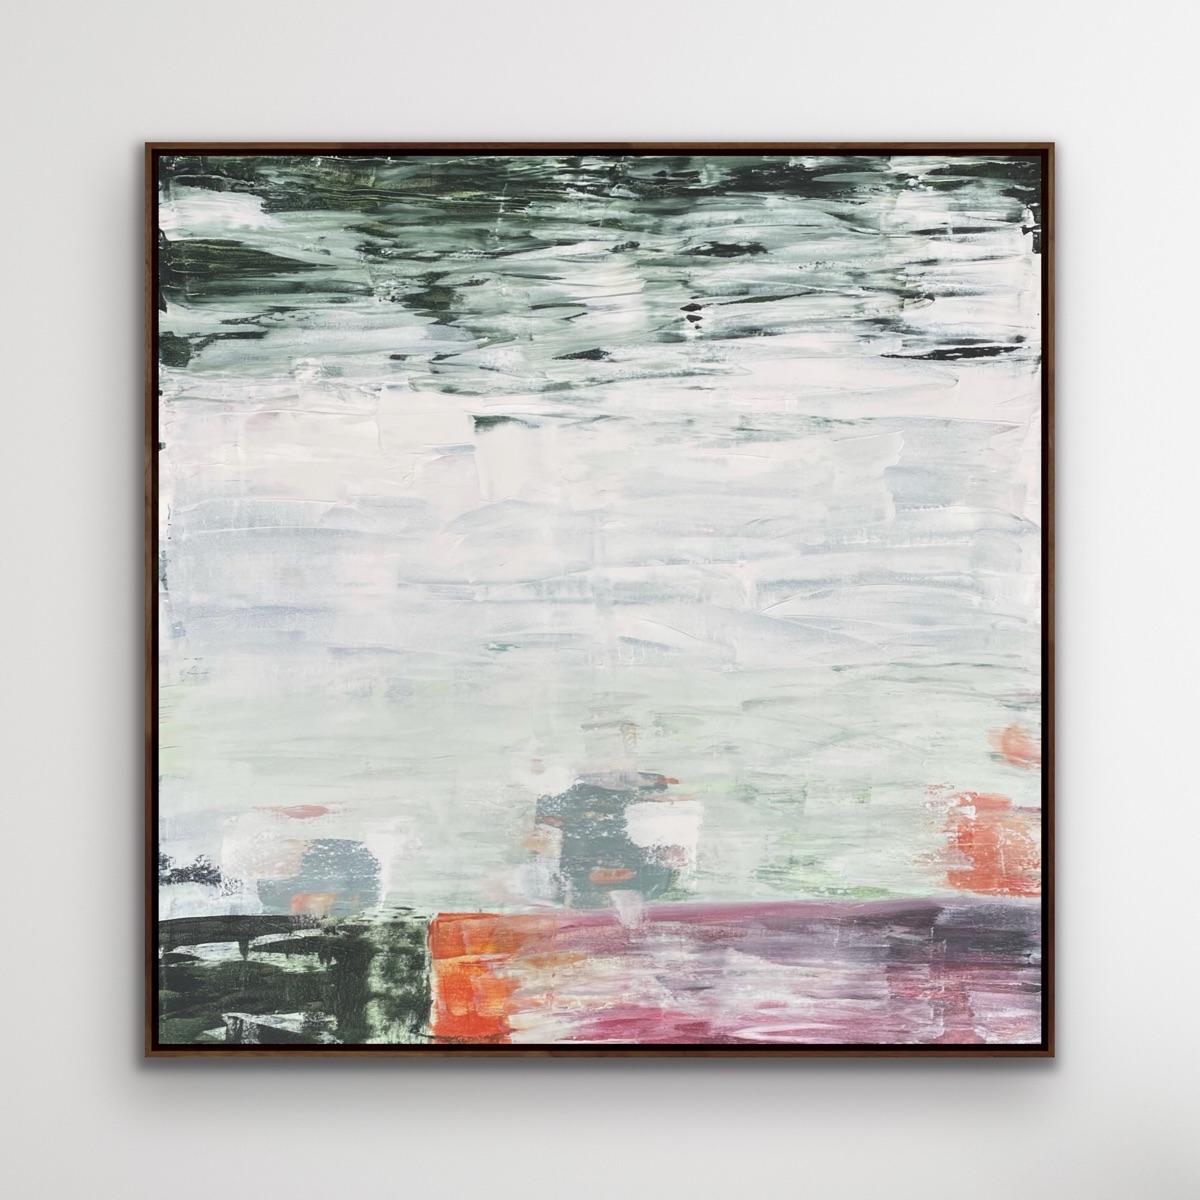 Autumn Sunrise by Fleur Park [2022]
Autumn Sunrise is an original abstract landscape painting by artist Fleur Park which takes inspiration from Gerhard Richter, the fields around where Fleur lives, the natural environment, and the colours created by